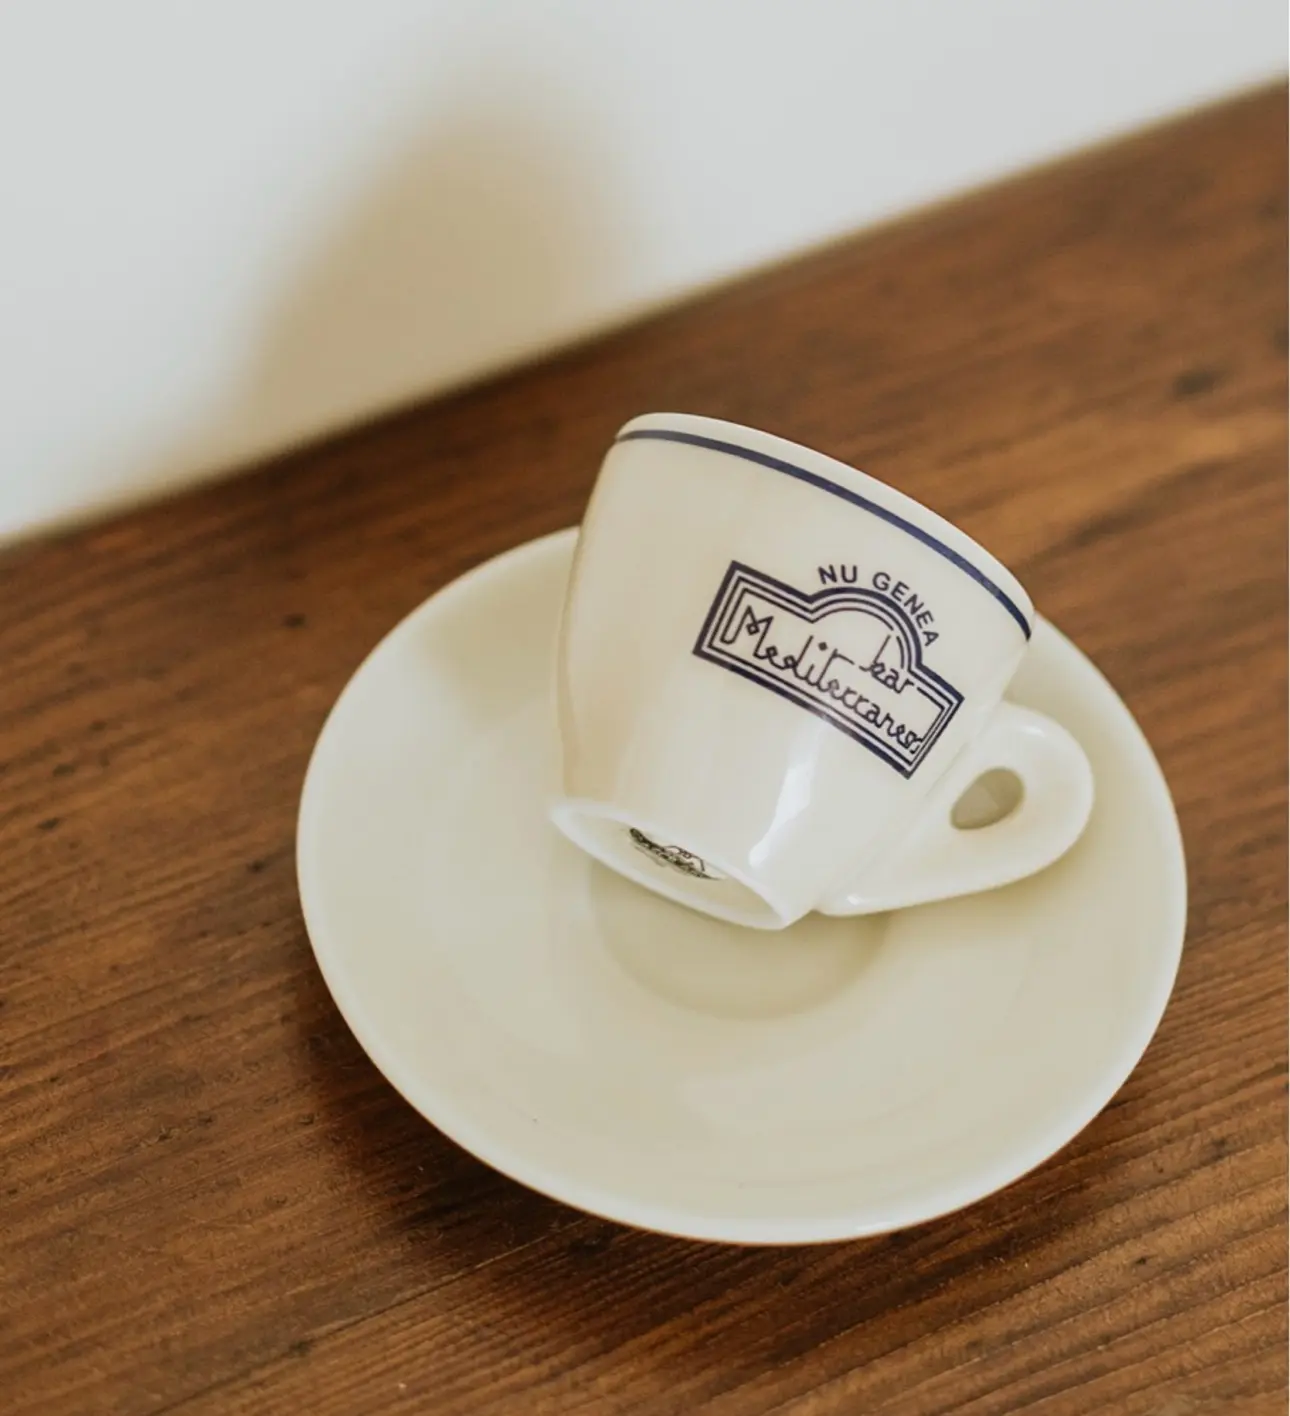 Bar Mediterraneo Porcelain Coffe Cup - Say Yes